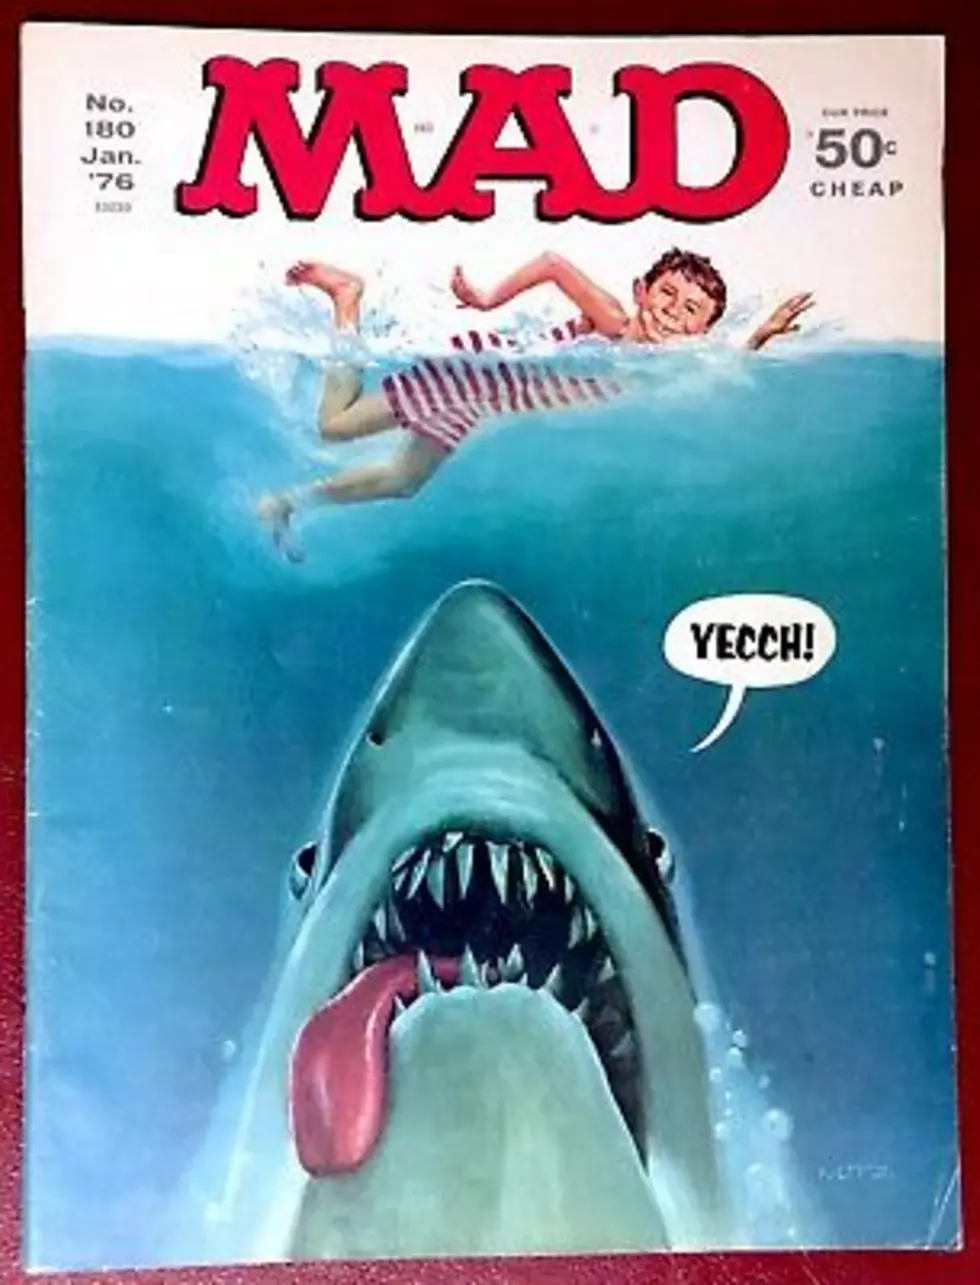 After 67 years in print, Mad Magazine is shutting down.